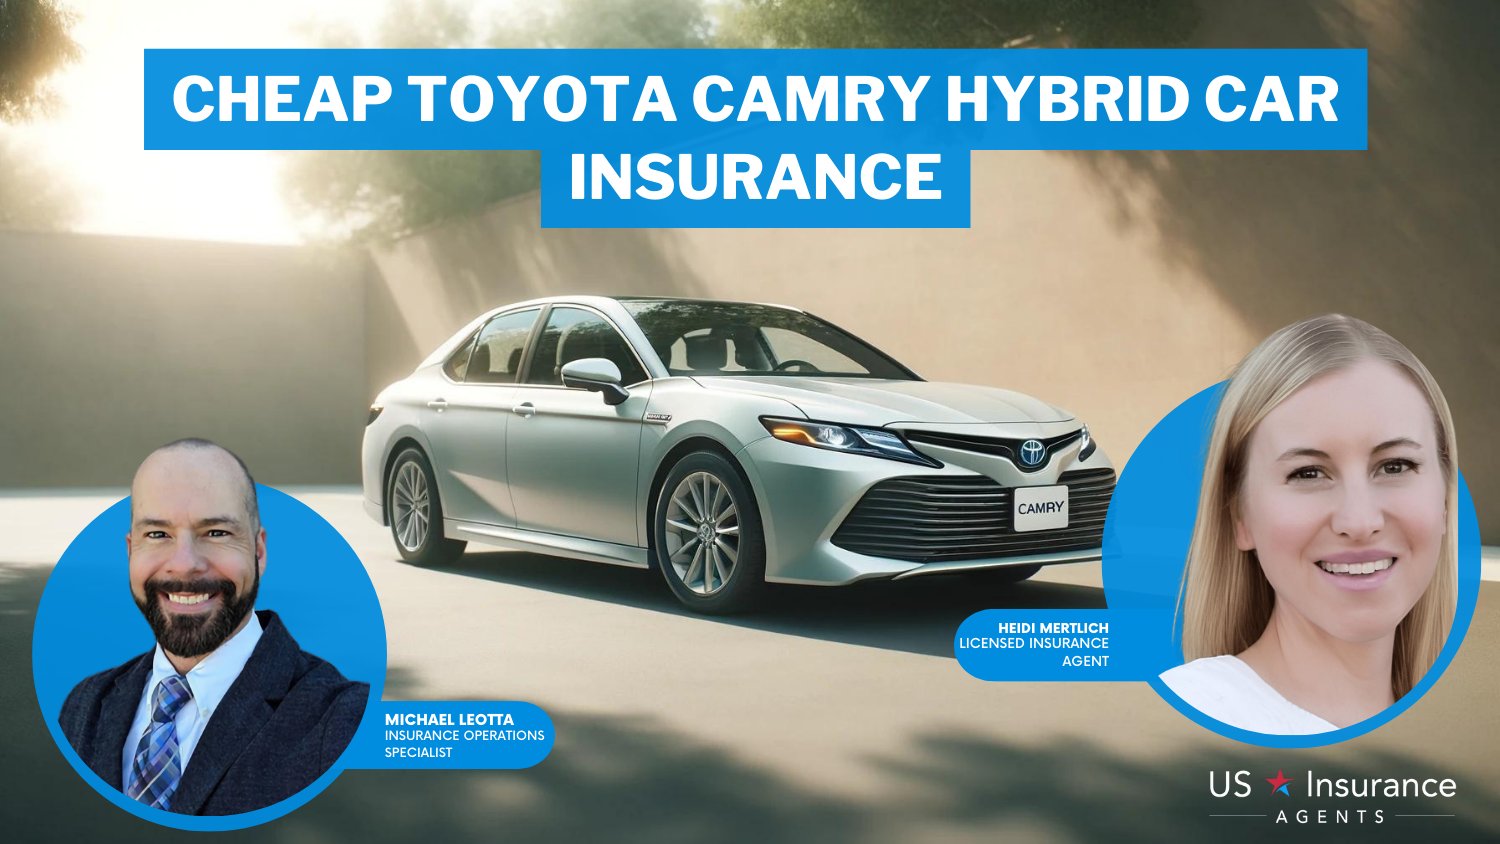 Cheap Toyota Camry Hybrid Car Insurance: The General, USAA, and Progressive